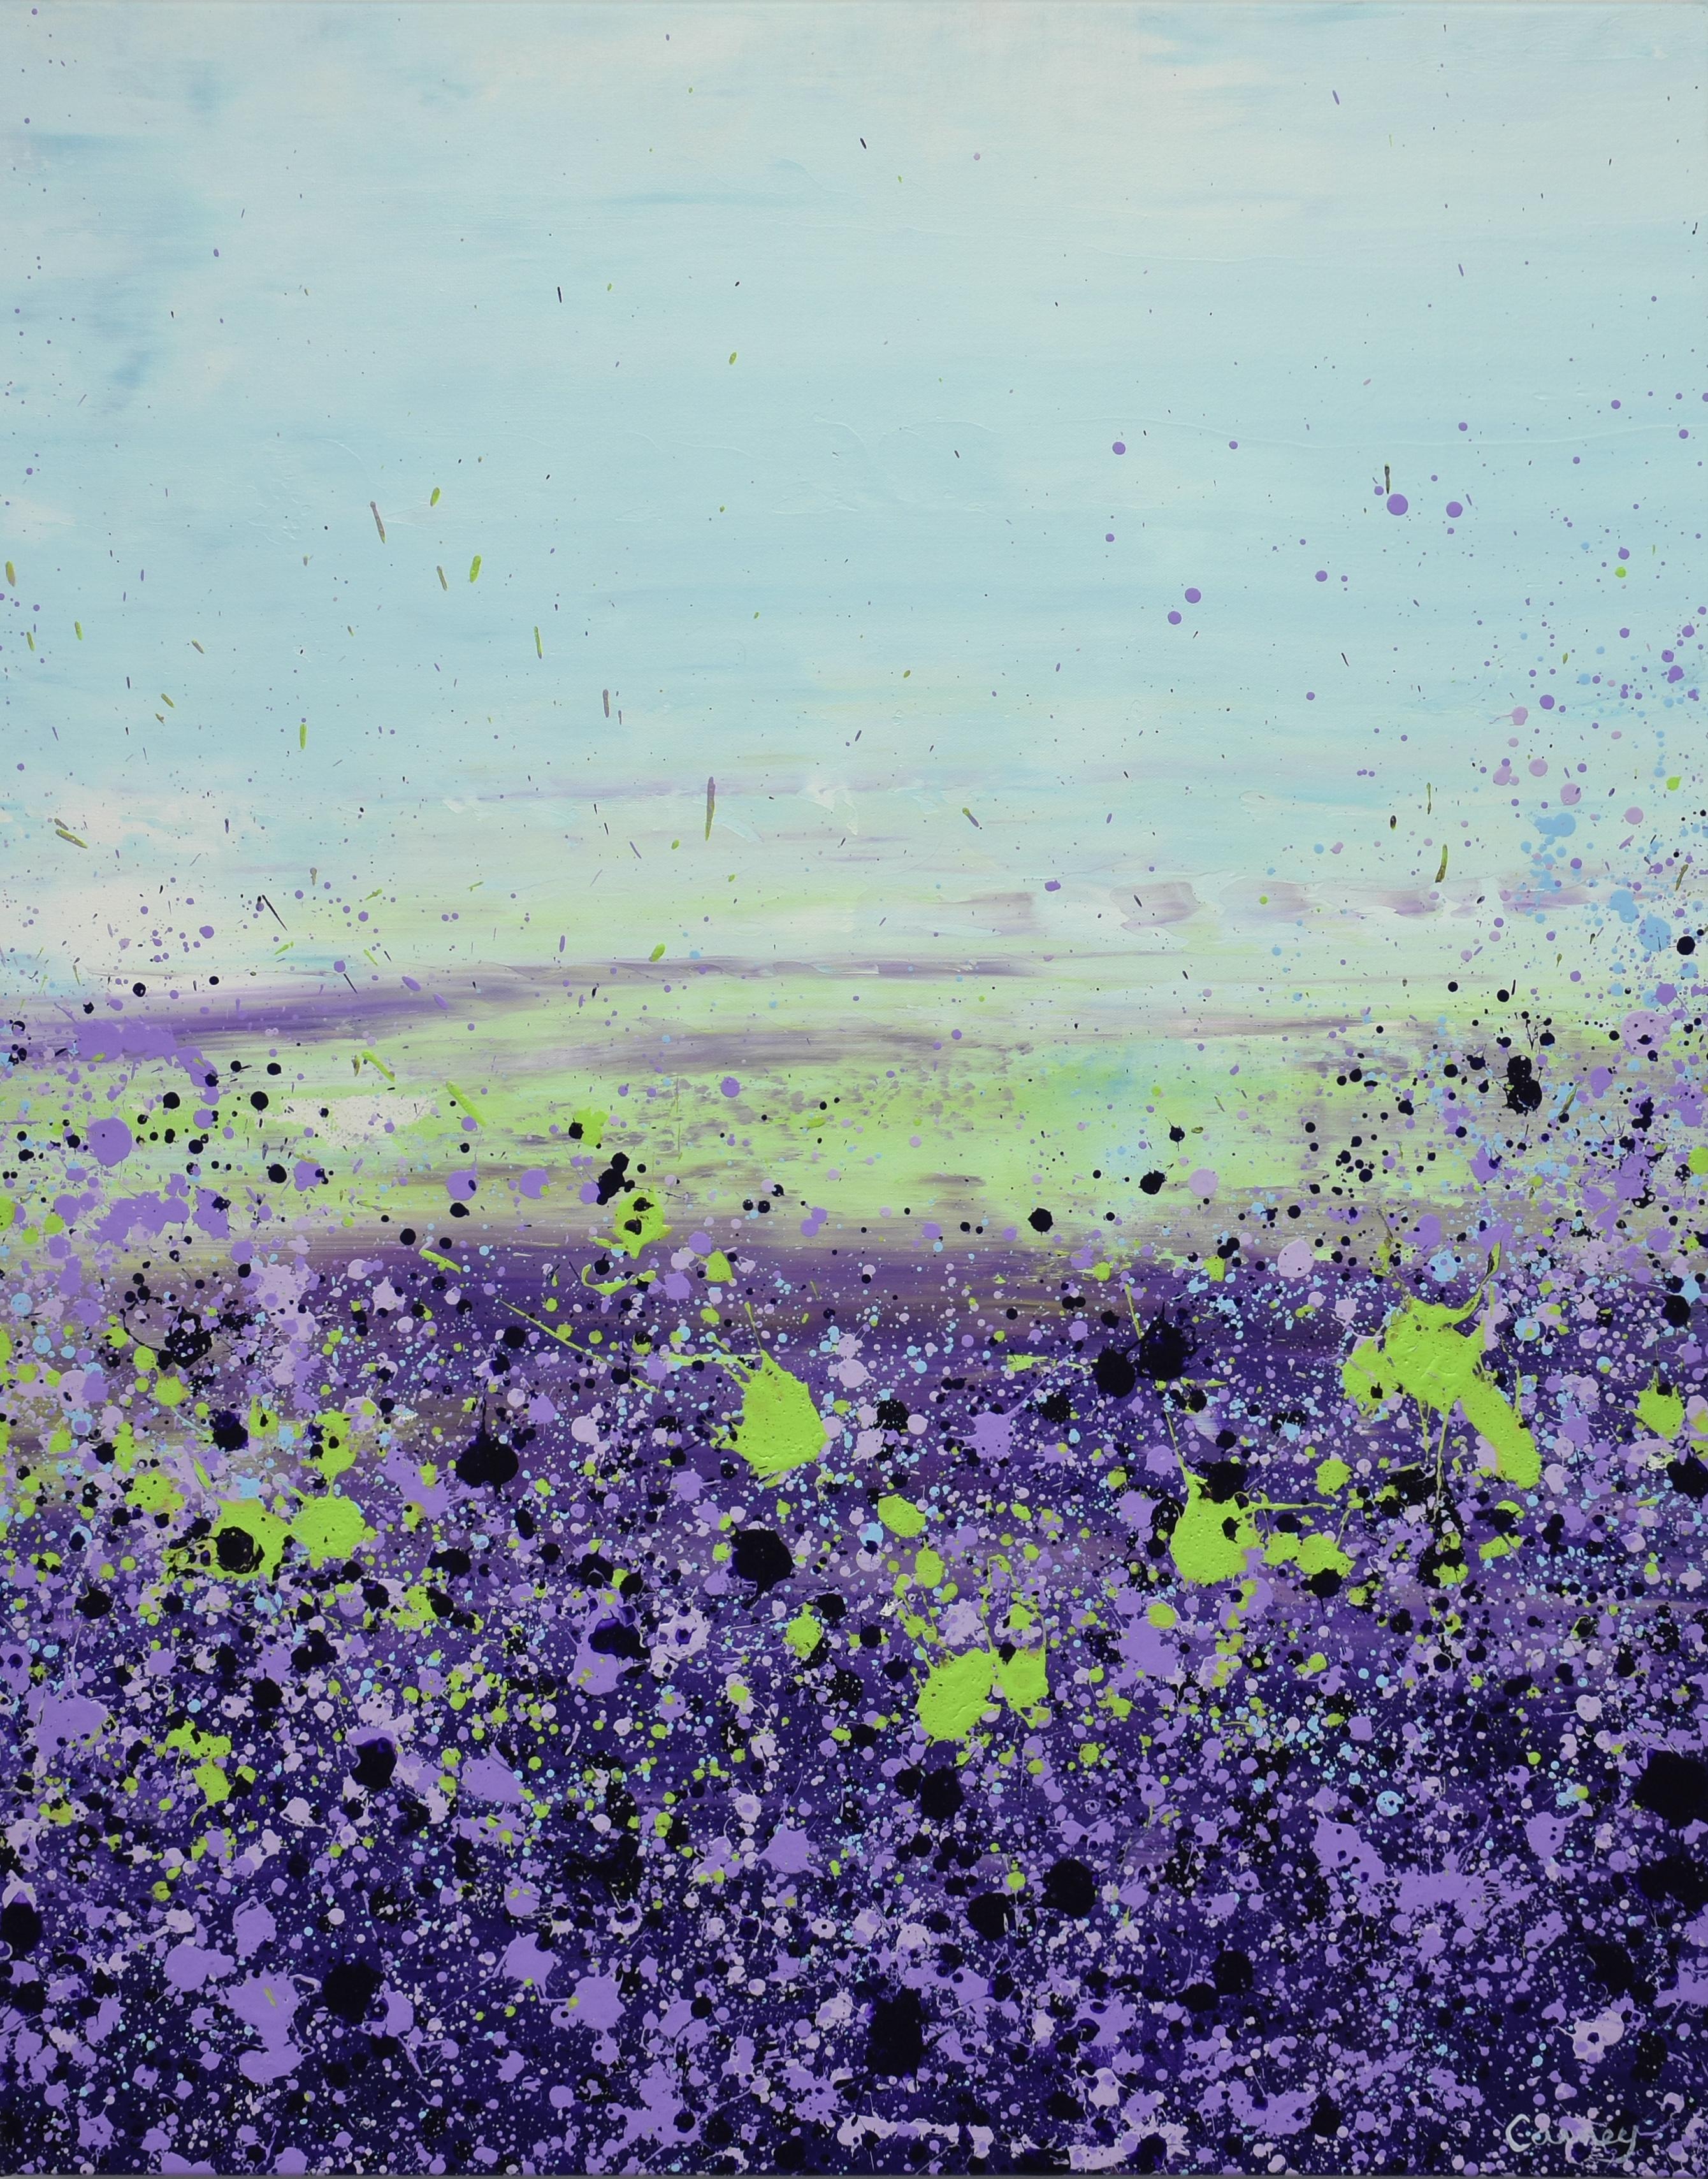 <p>Artist Comments<br>Artist Lisa Carney exhibits a floral abstract of deep purple and green foliage. Part of her ongoing GeoFlora series of dynamic abstractions comprised of drips and splatters. The composition features stunning shades of blue,